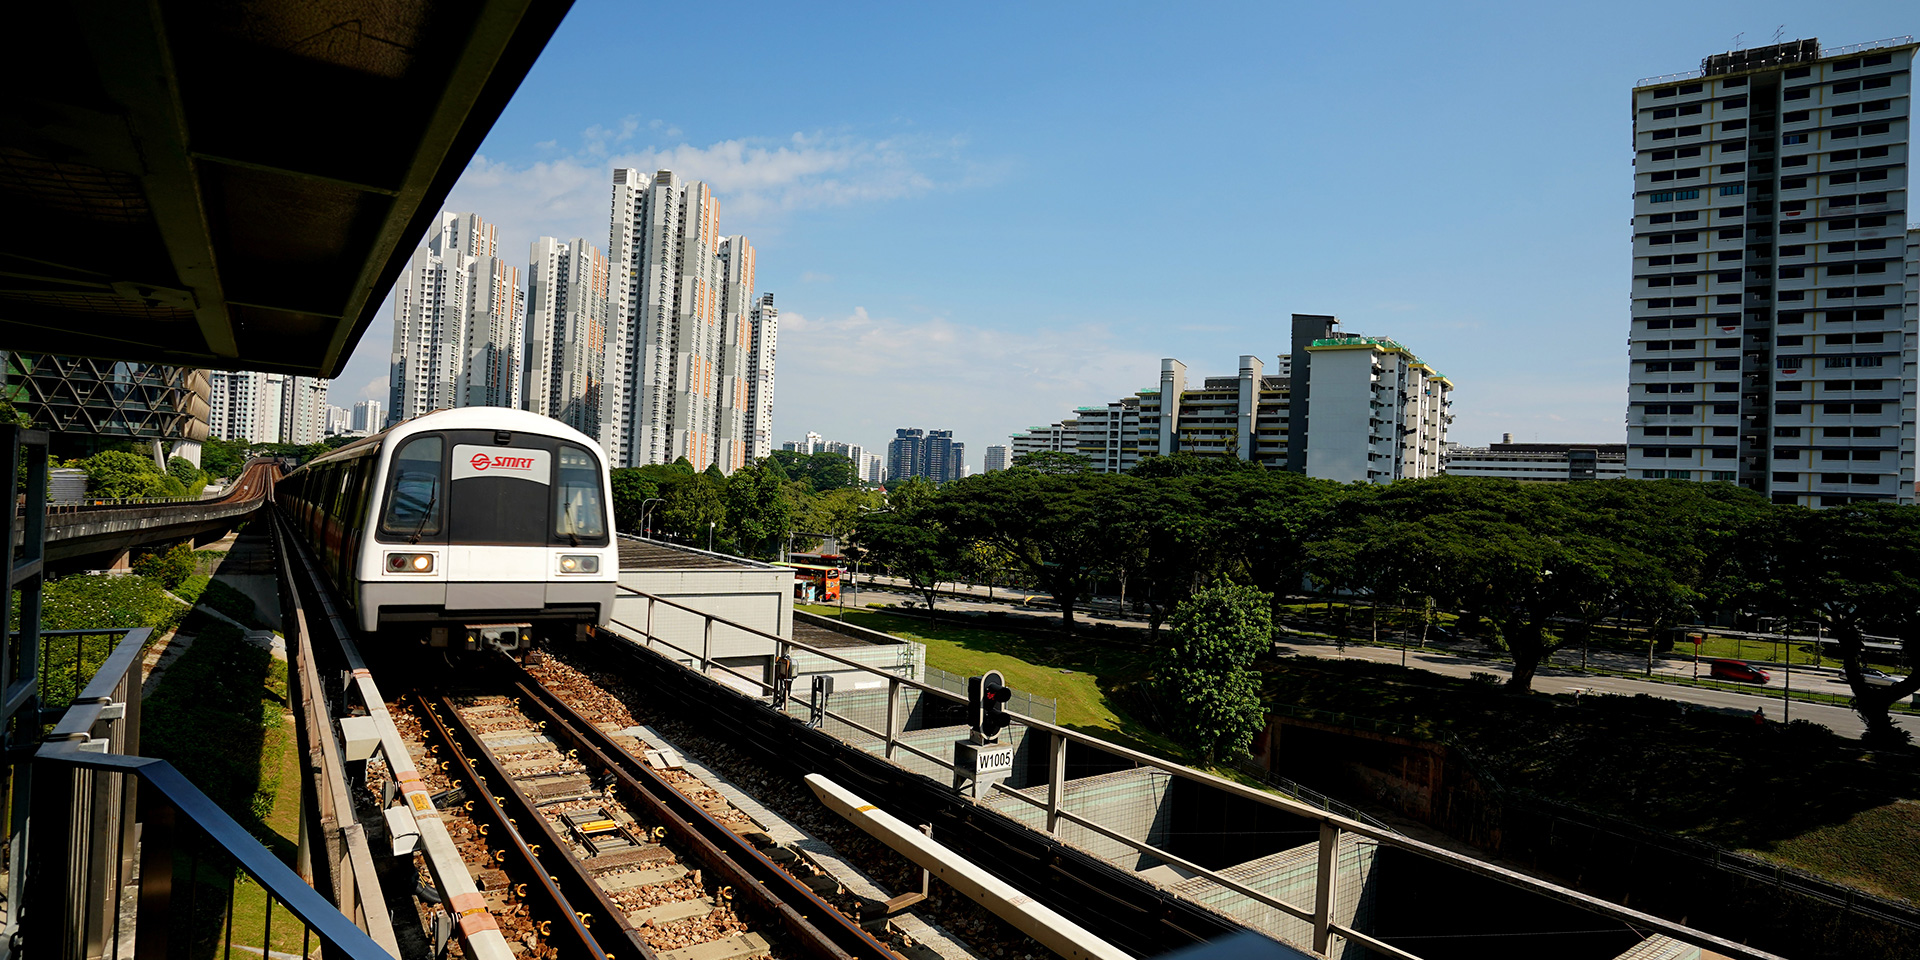 The LTA will make the MRT greener with new materials and finishes